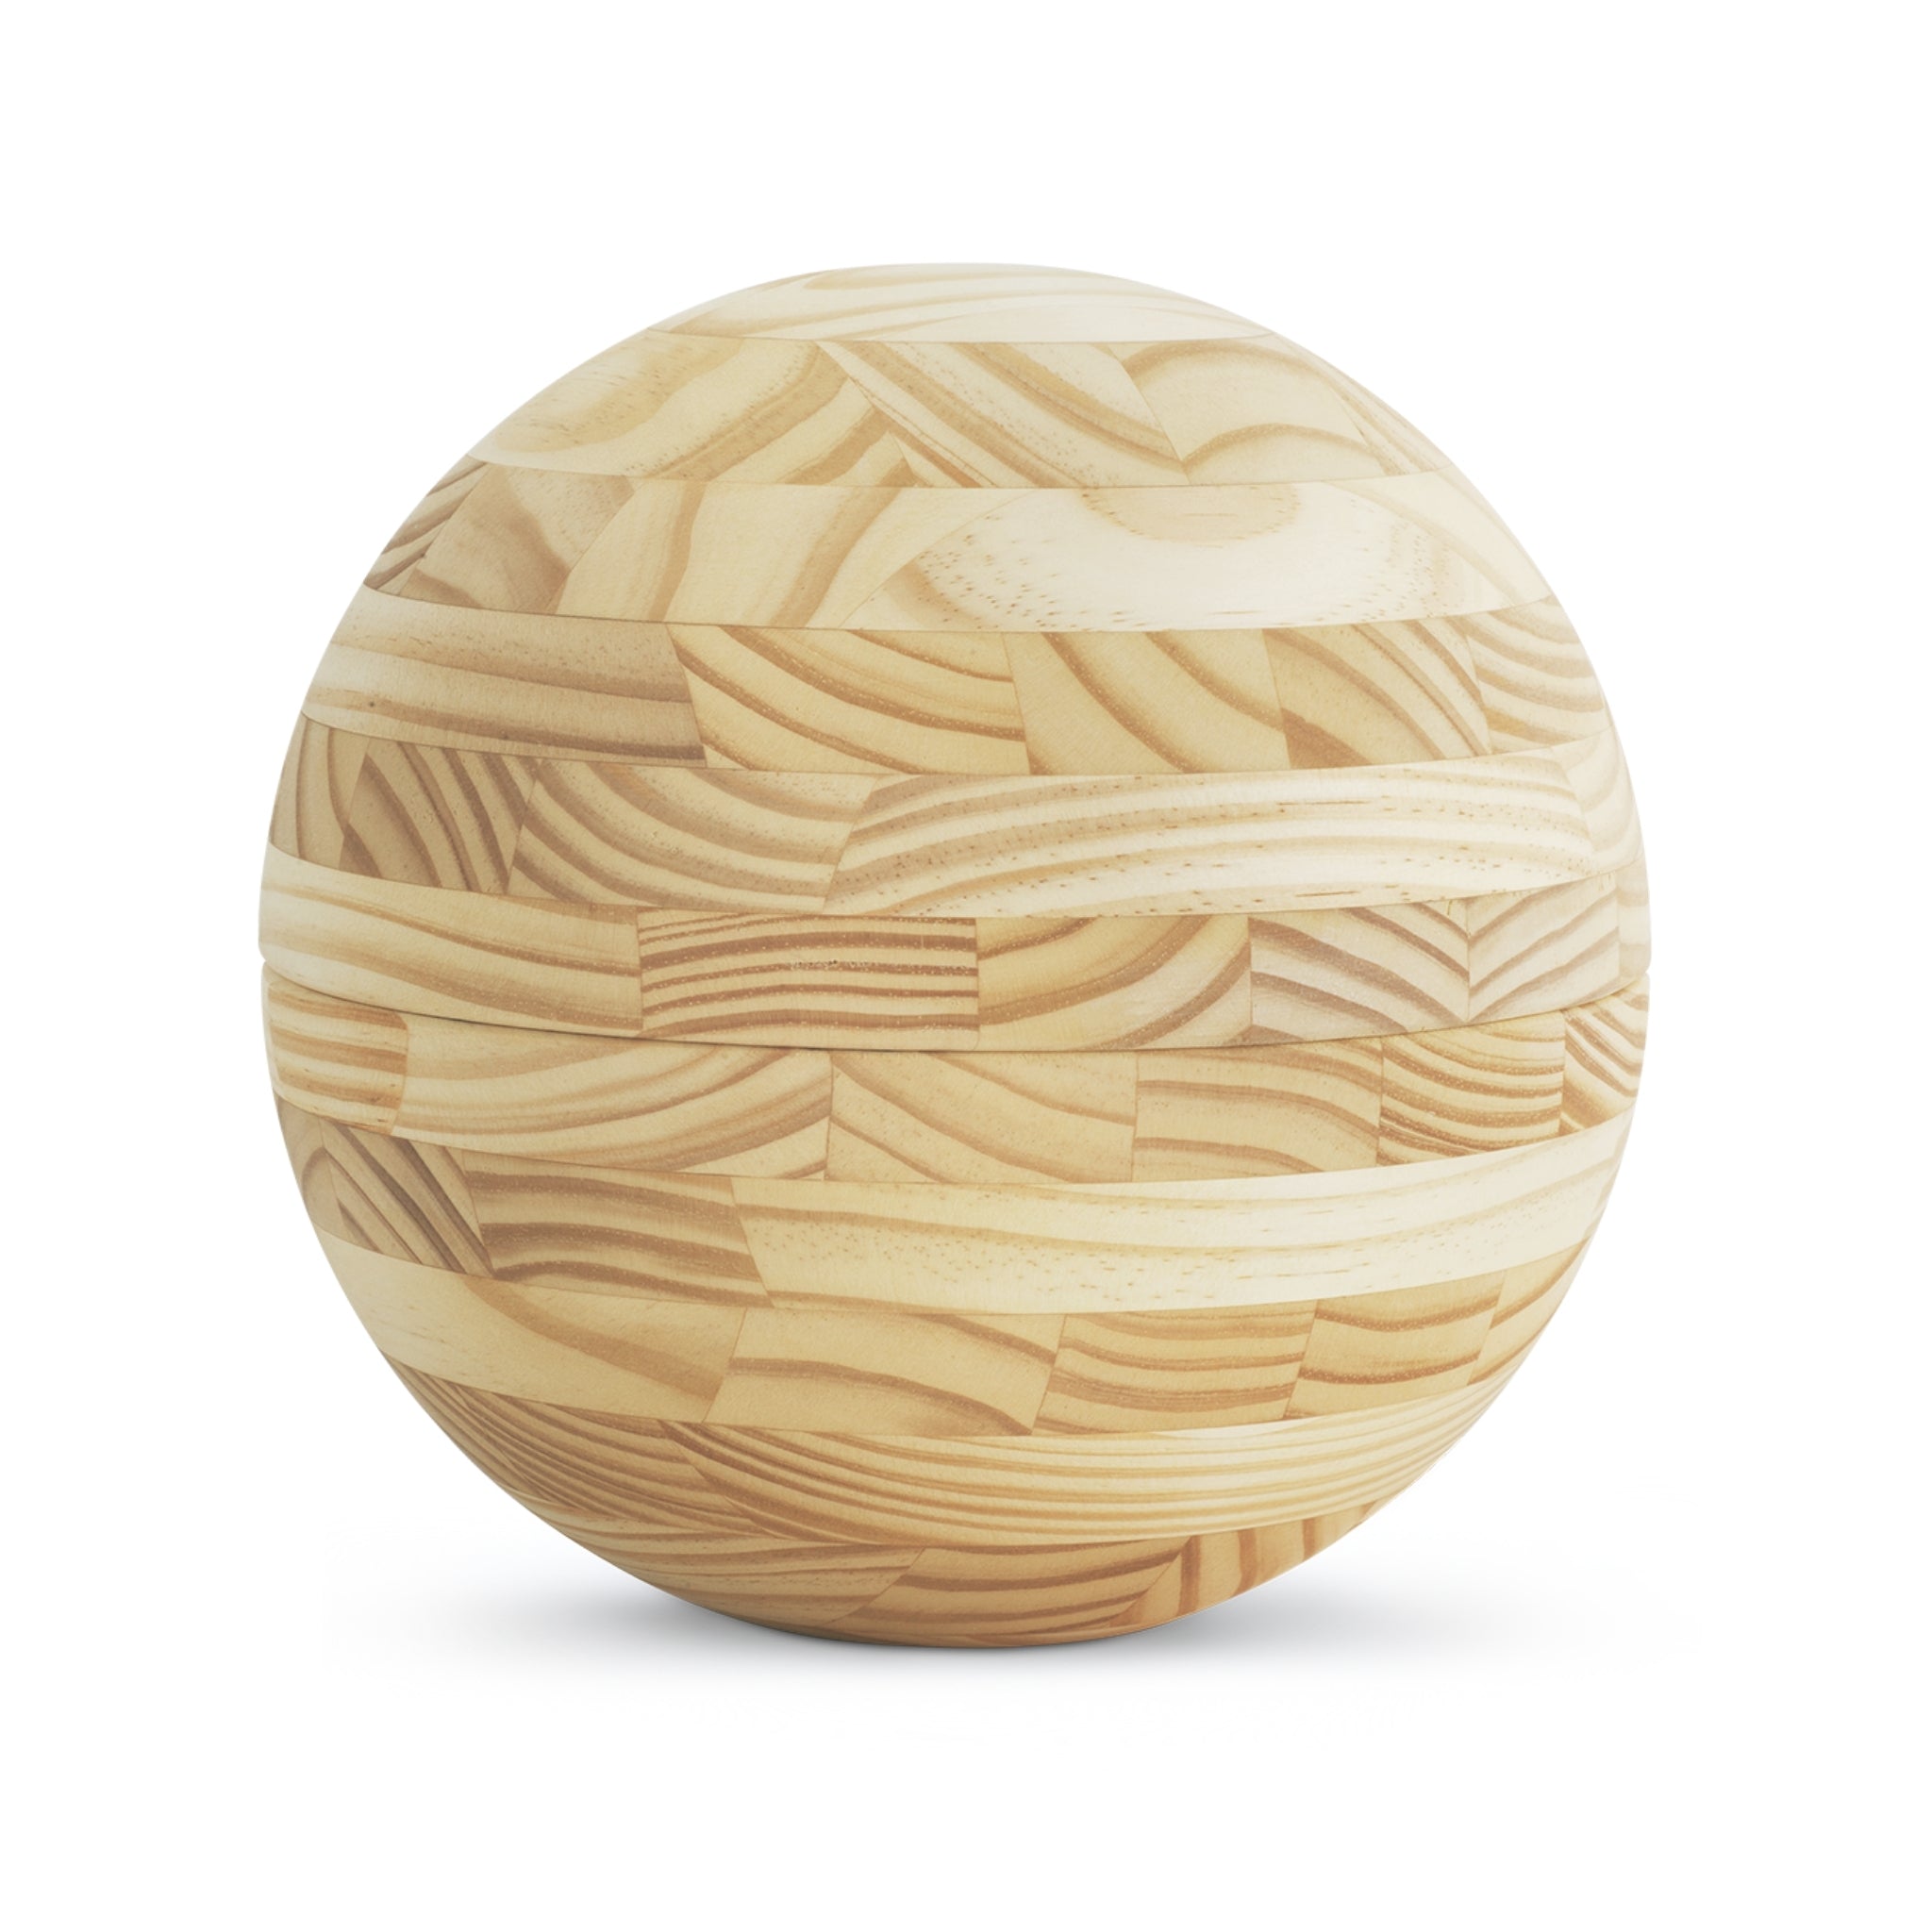 Roundwood Sphere  Cremation Ashes Urn Pine VOL